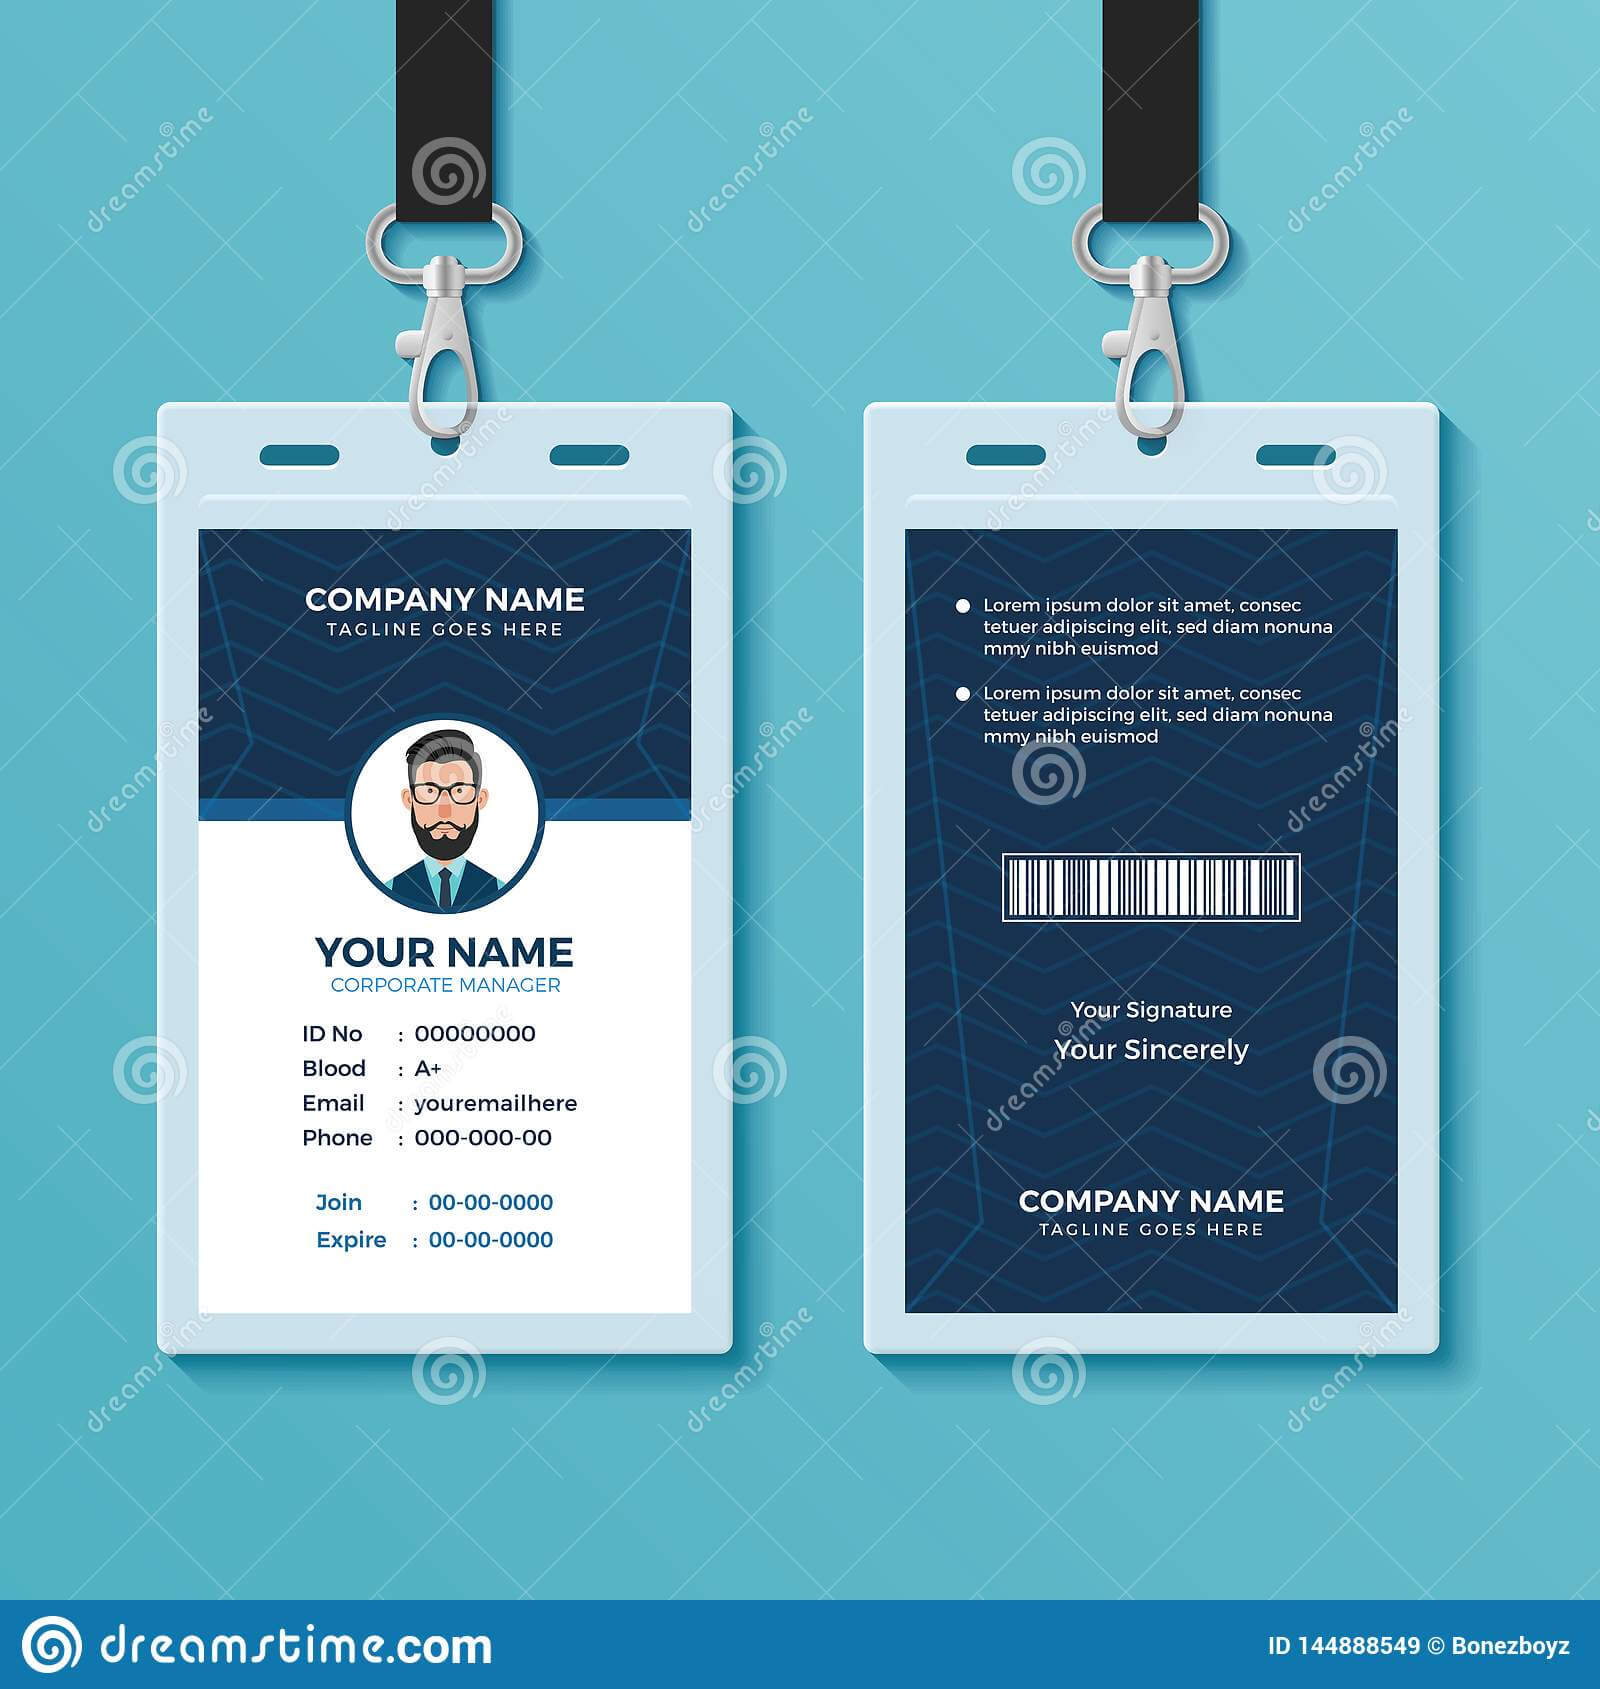 Modern And Clean Id Card Design Template Stock Vector For Conference Id Card Template